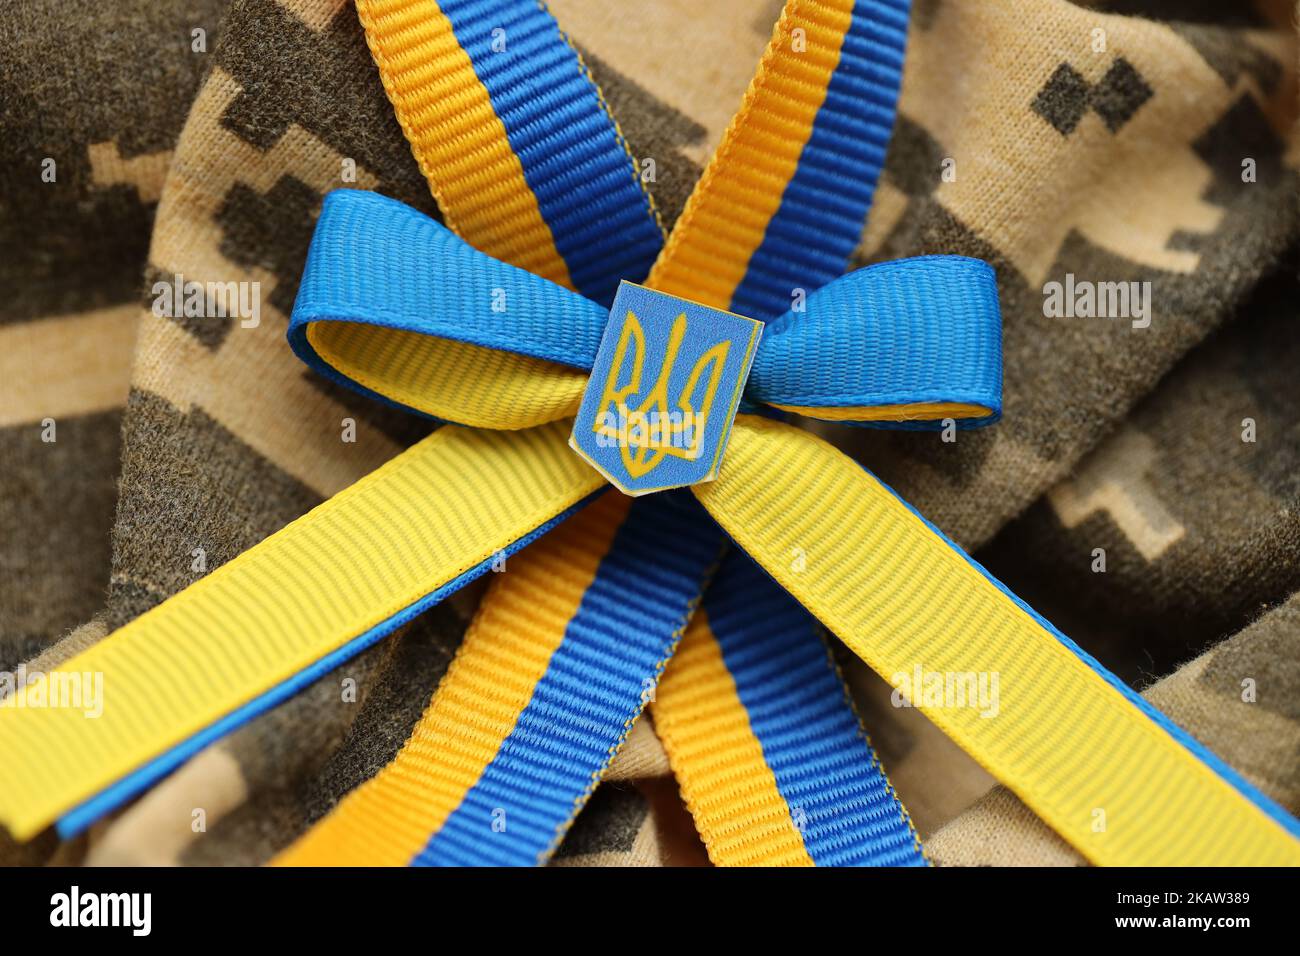 Pixeled digital military camouflage fabric with ukrainian flag and coat of arms on stripes ribbon in blue and yellow colors. Attributes of ukrainian s Stock Photo